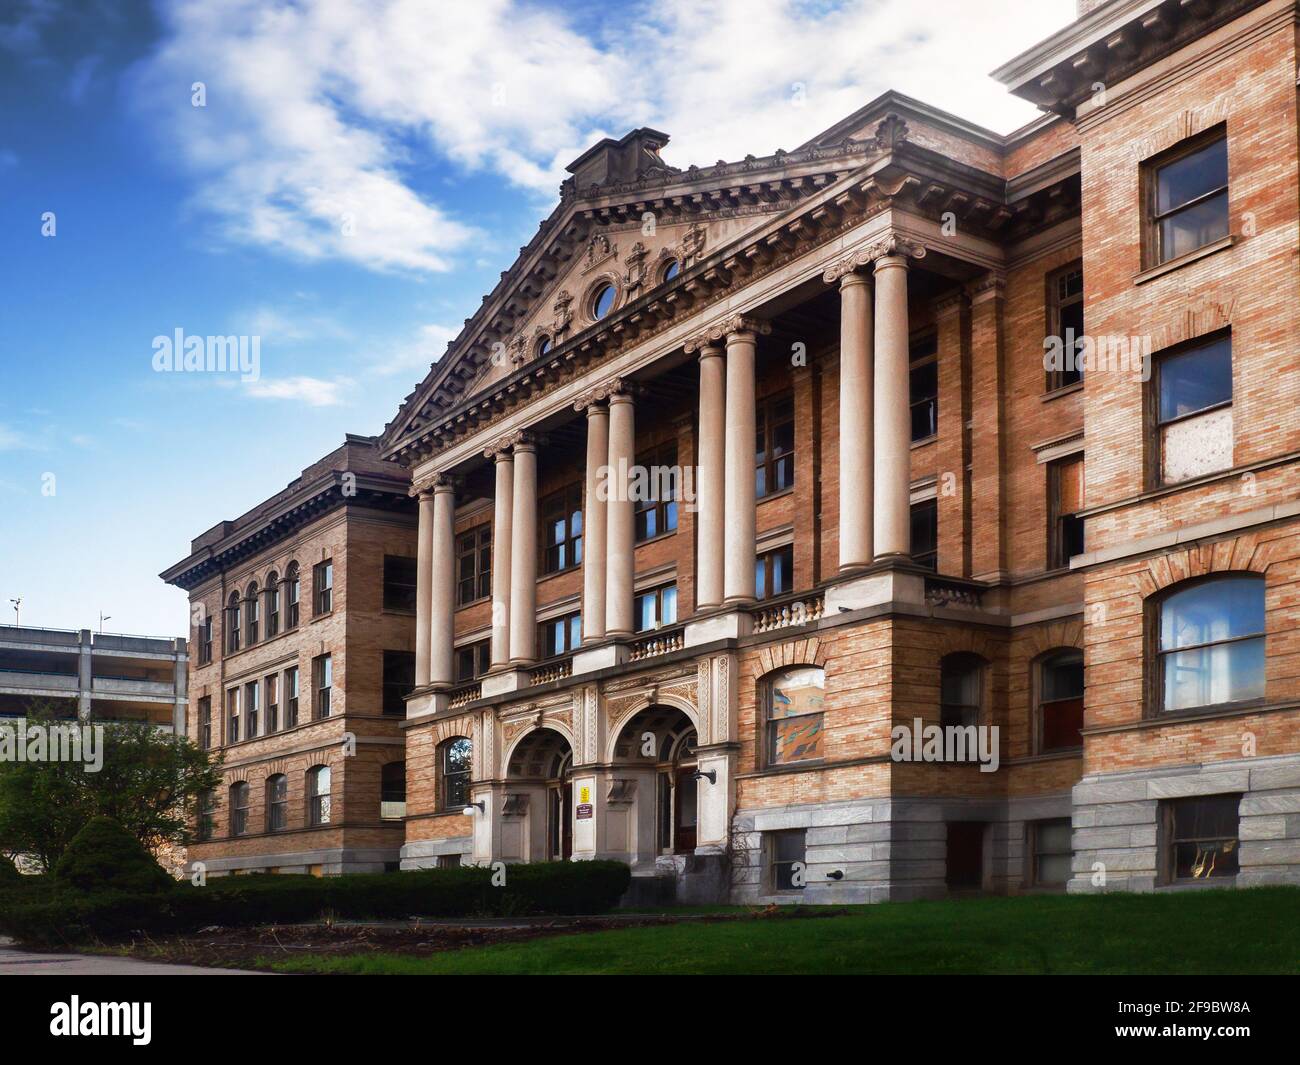 Syracuse, New York, USA. April 17, 2021. View of the Central Technical High School building , built in 1900, in downtown Syracuse, New York, included Stock Photo